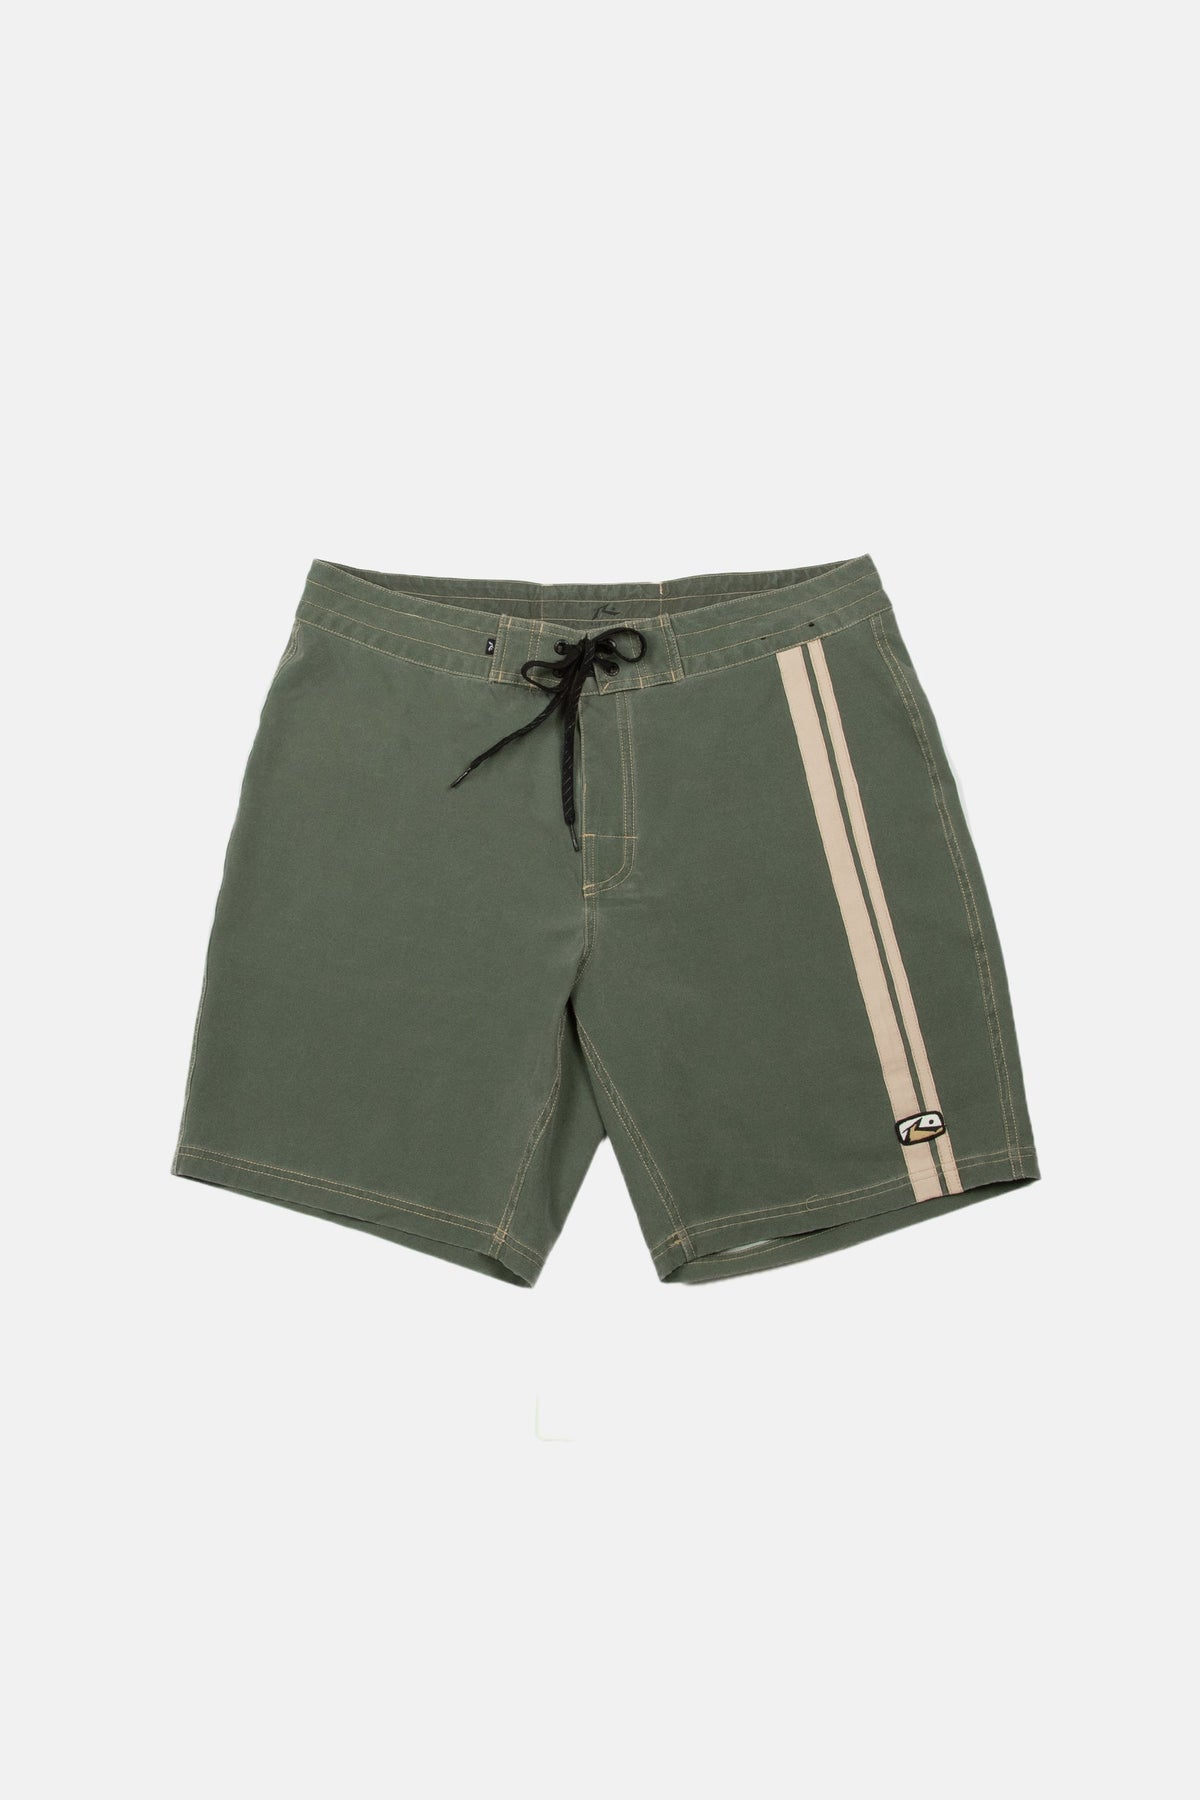 Rusty USA Burnt Rubber Fitted Boardshort SHADOW ARMY